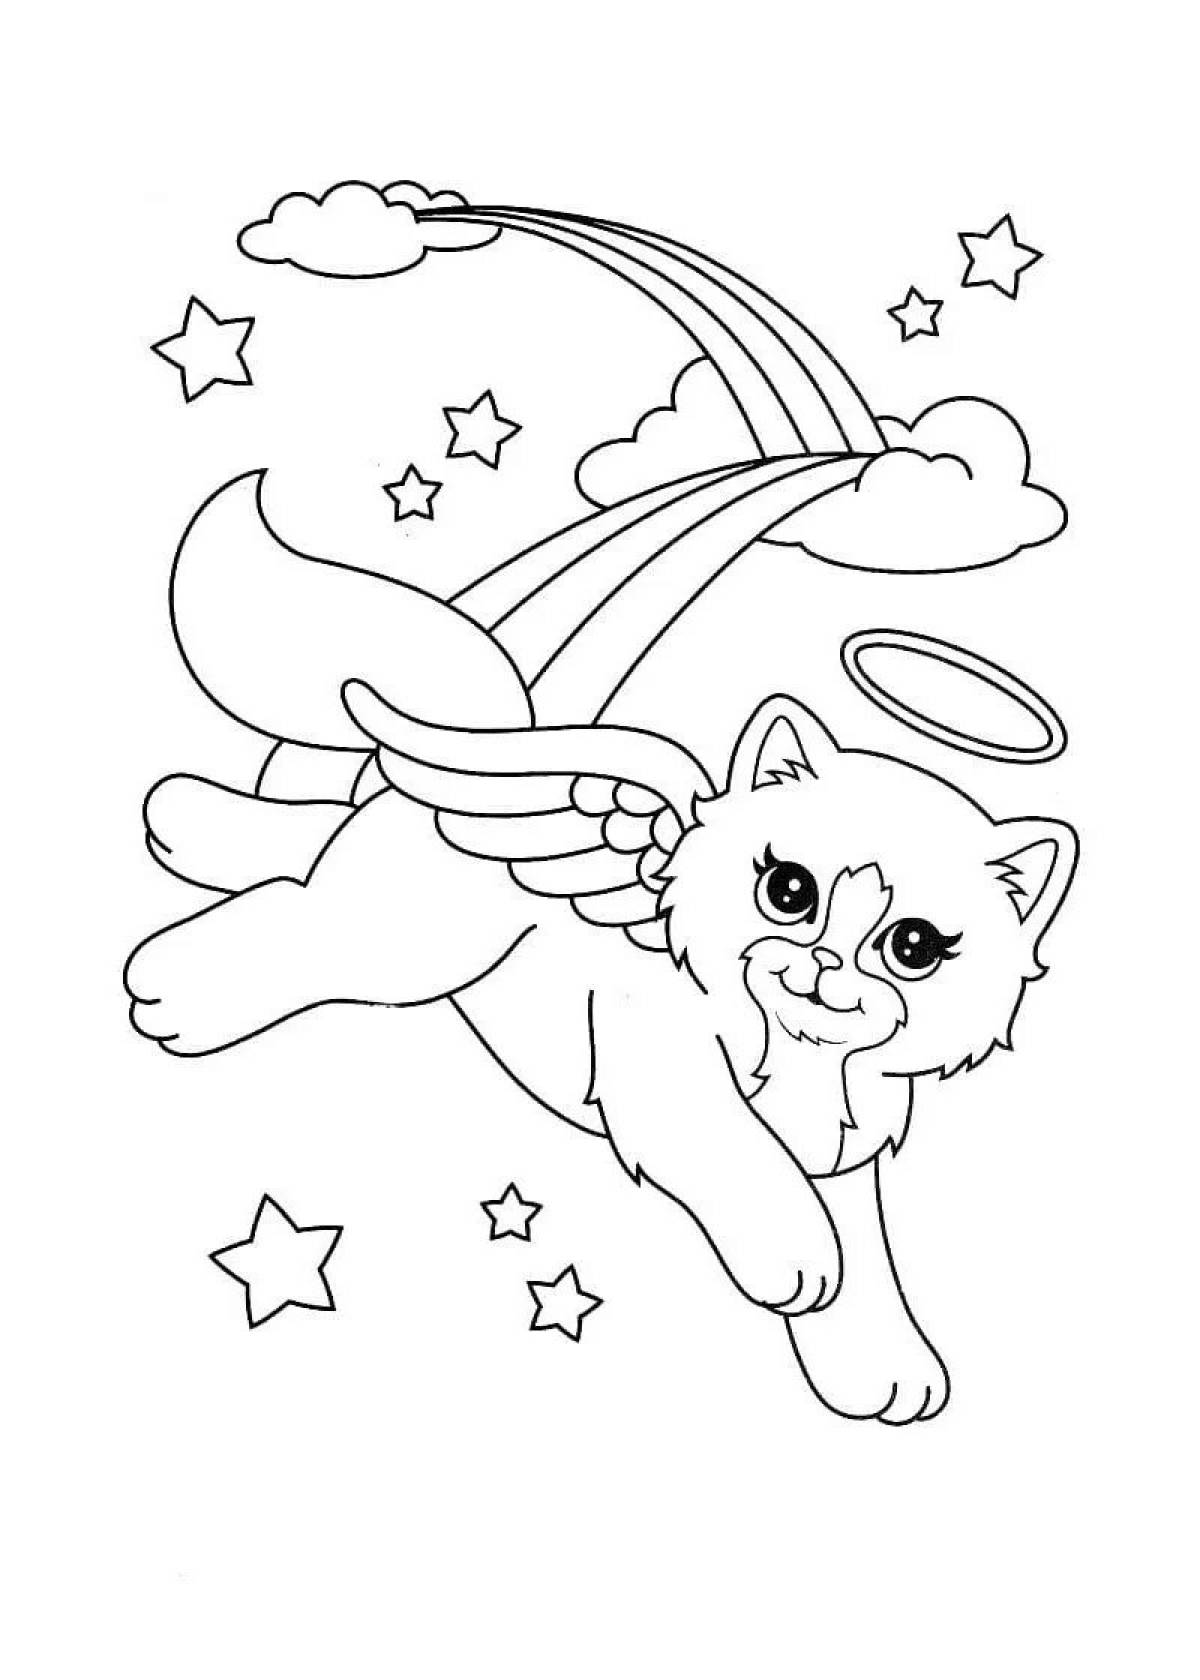 Coloring page spectacular flying cat